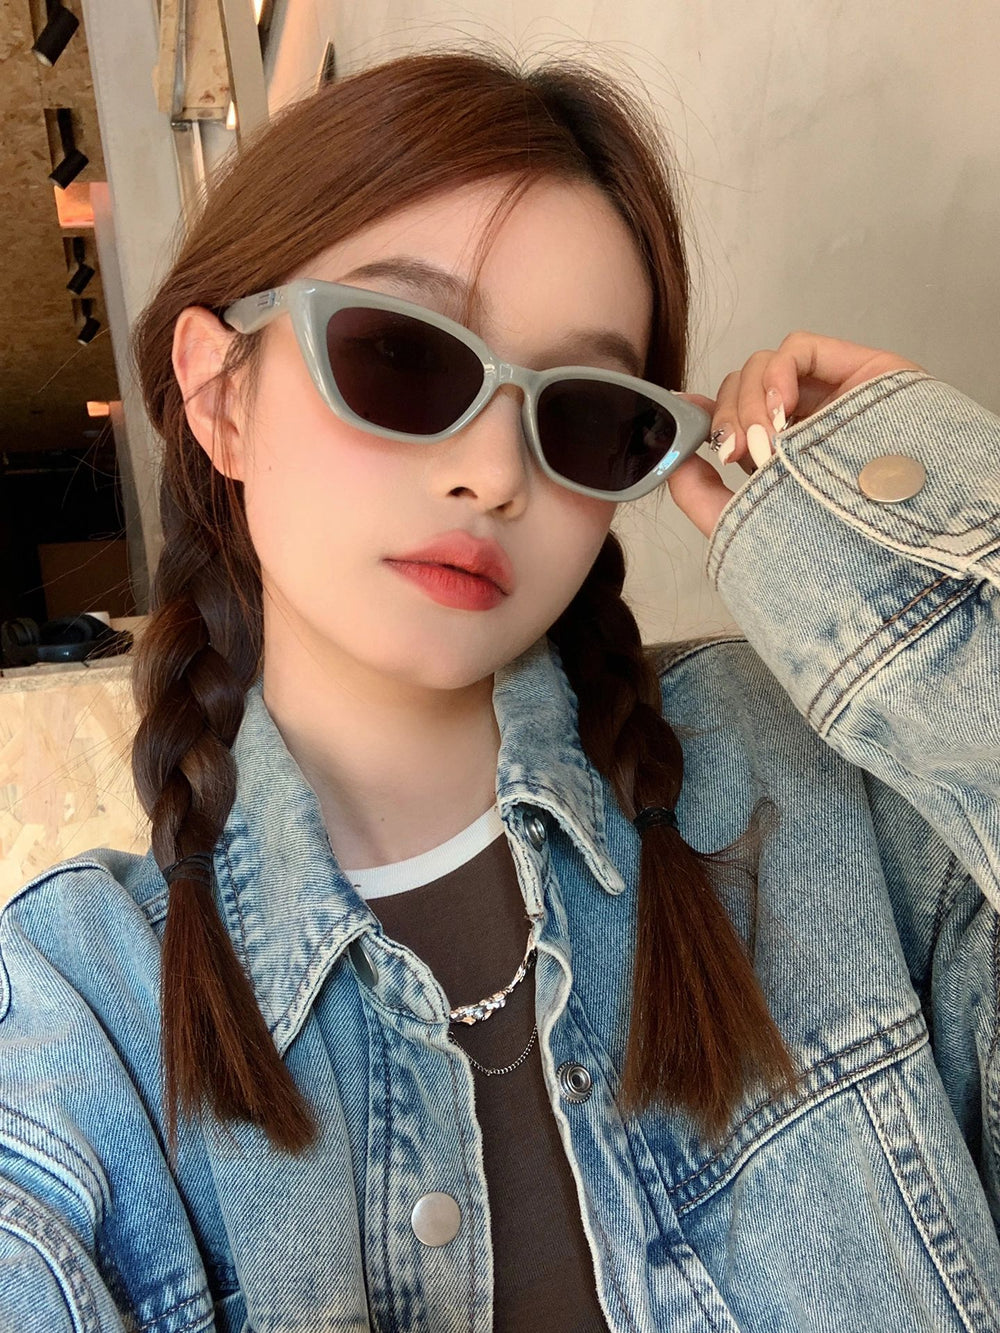 Fashionable lady dons sunglasses and a denim jacket, showcasing her effortless style.